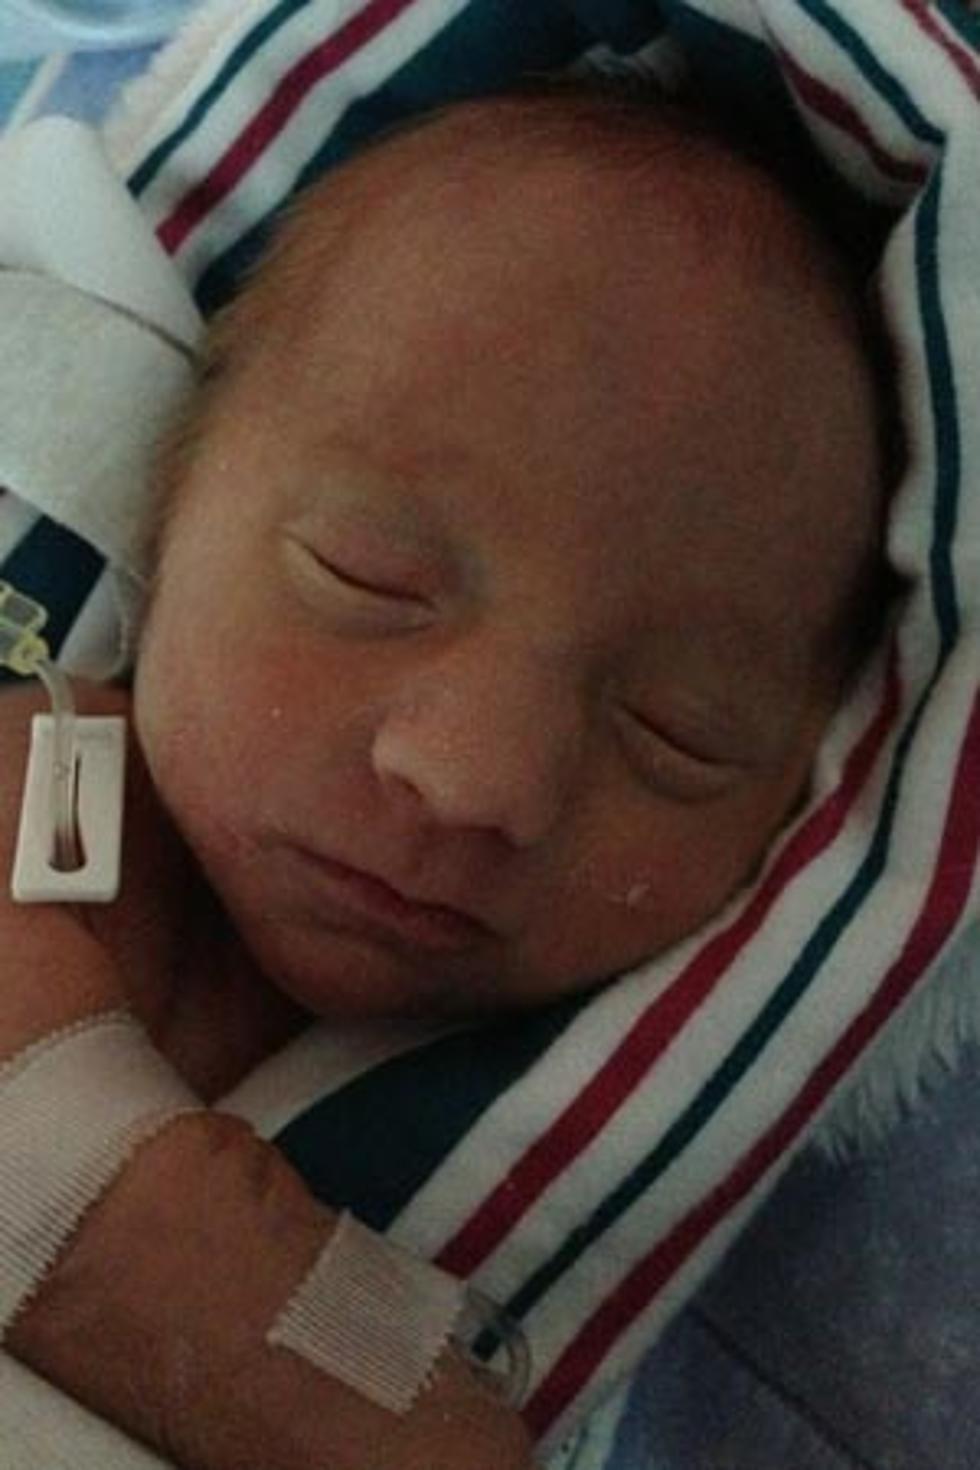 Love and Theft&#8217;s Eric Gunderson Shares First Photo of Newborn Son